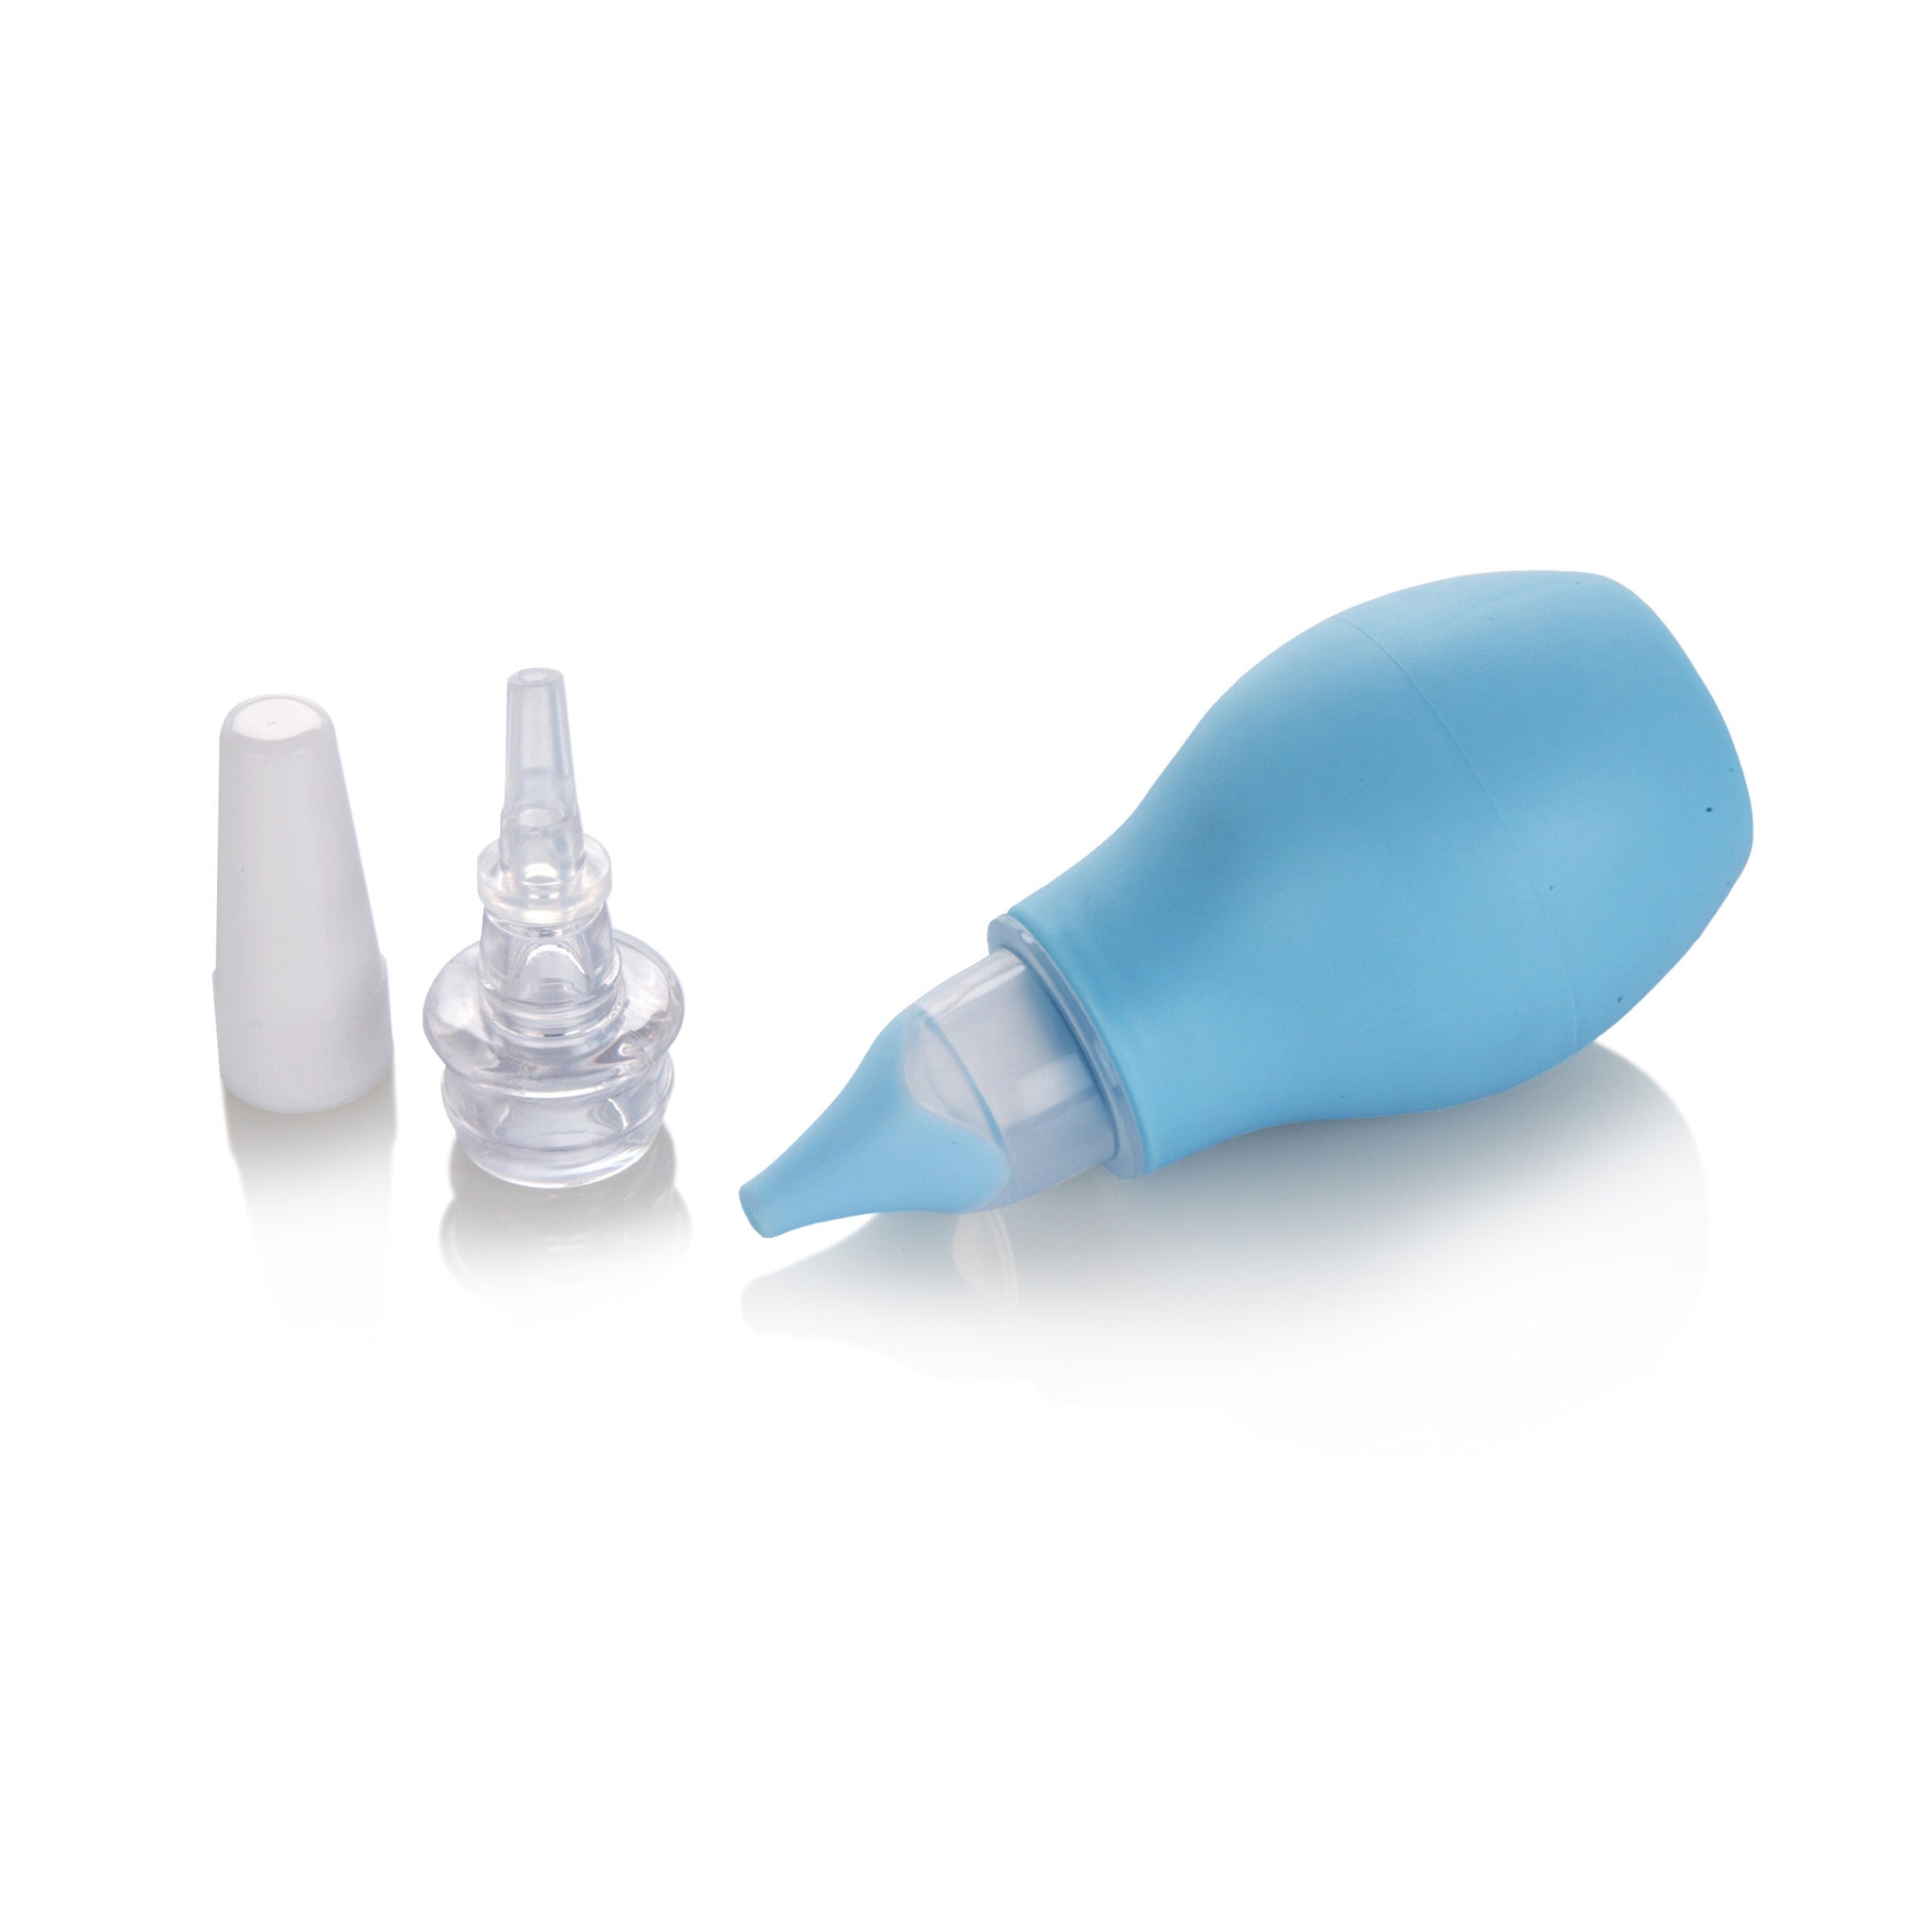 Baby nasal aspirator Nose cleaning supplies Silicone nasal aspirator  Reusable Portable Baby Safety Care for Nursery Newborn Infant Girls Boys  Keep Clean 